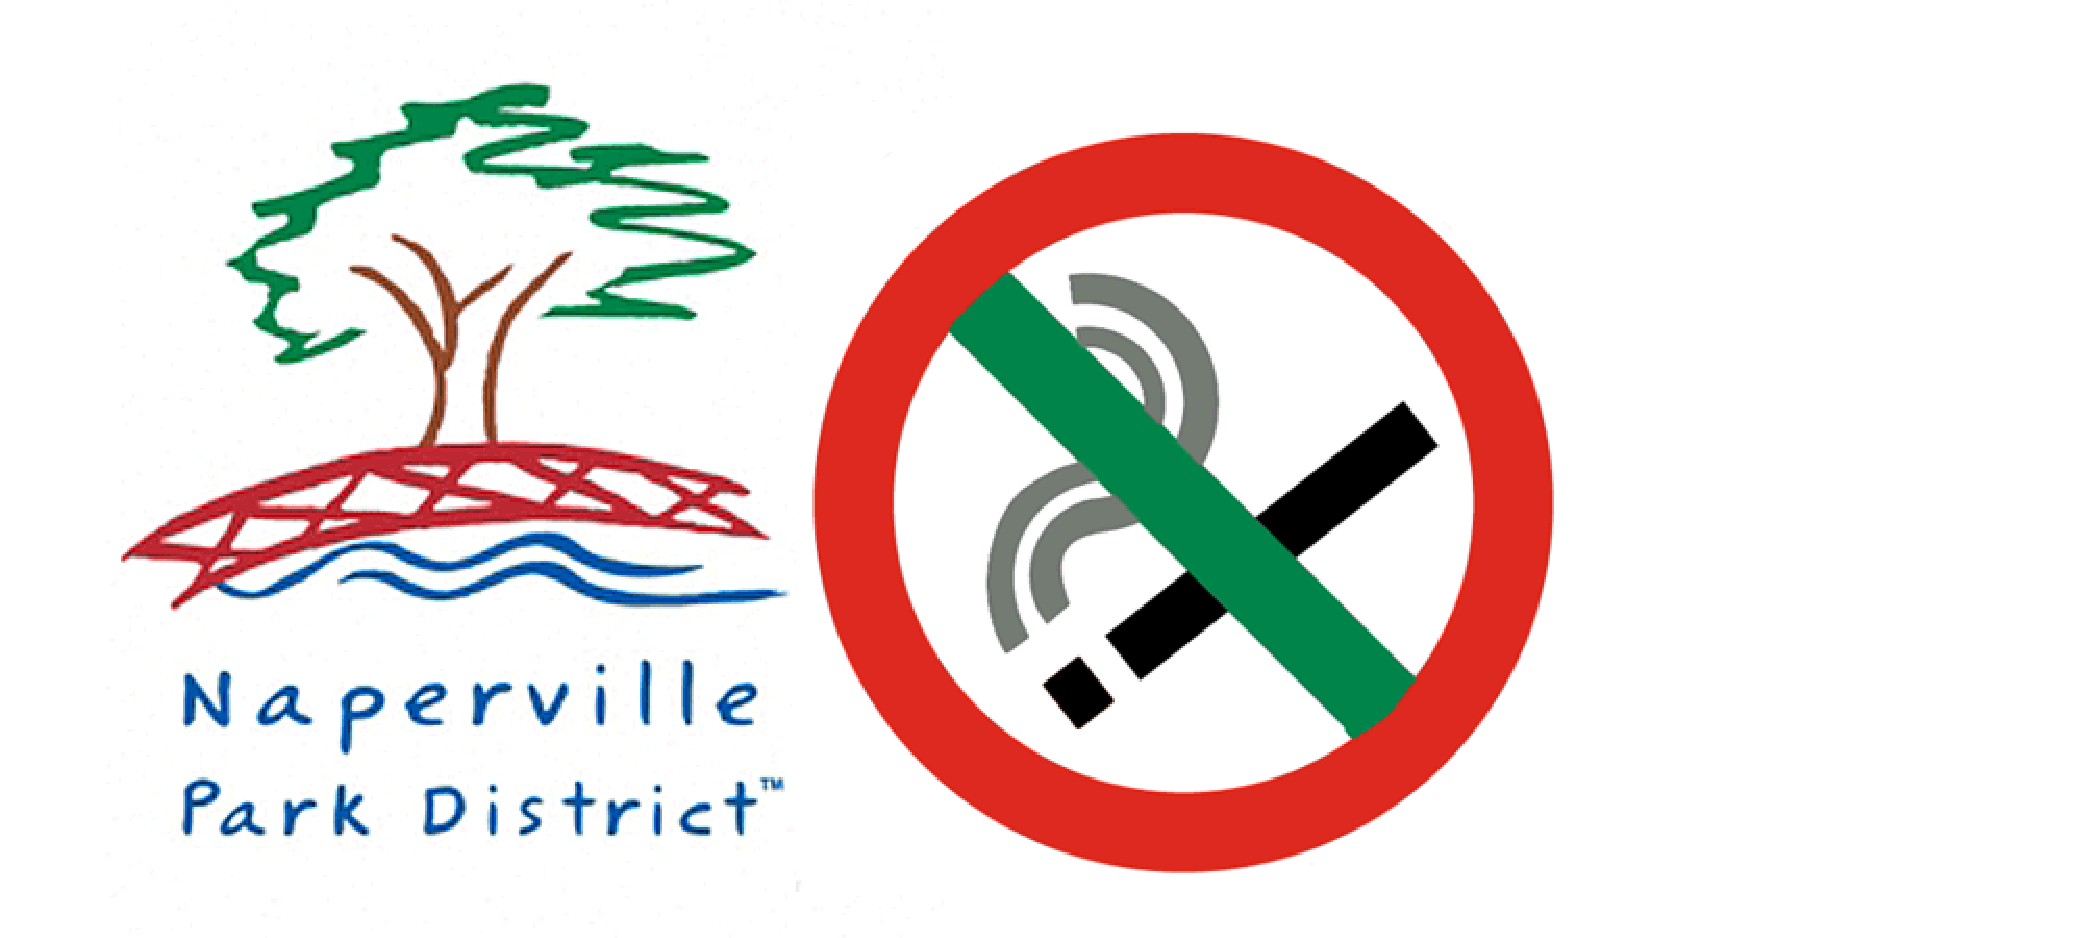 Naperville Park District Board votes to ban smoking in all 137 parks